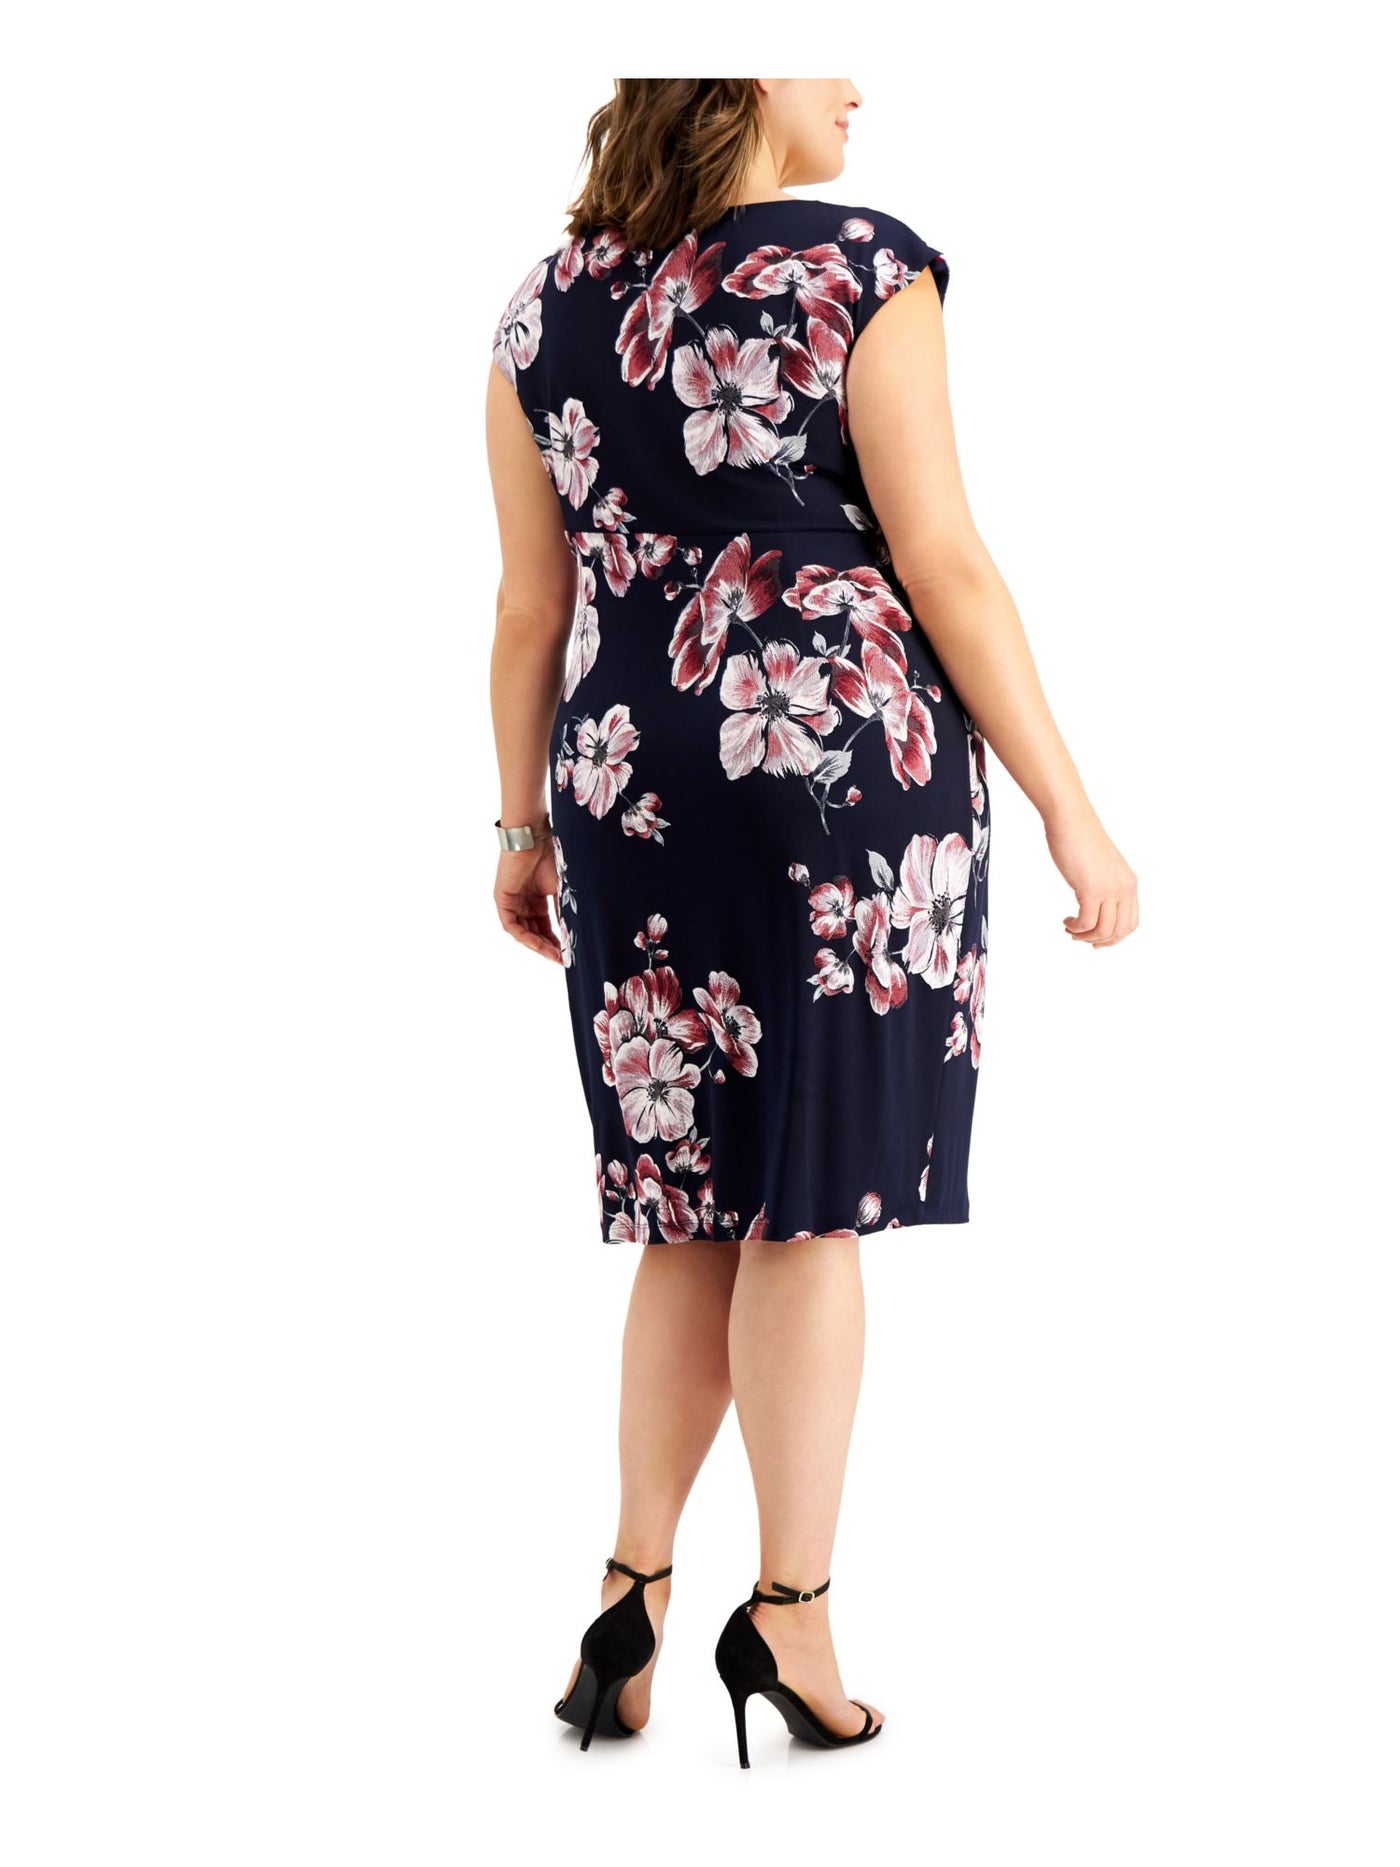 CONNECTED APPAREL Womens Navy Stretch Floral Sleeveless Round Neck Below The Knee Party Sheath Dress S